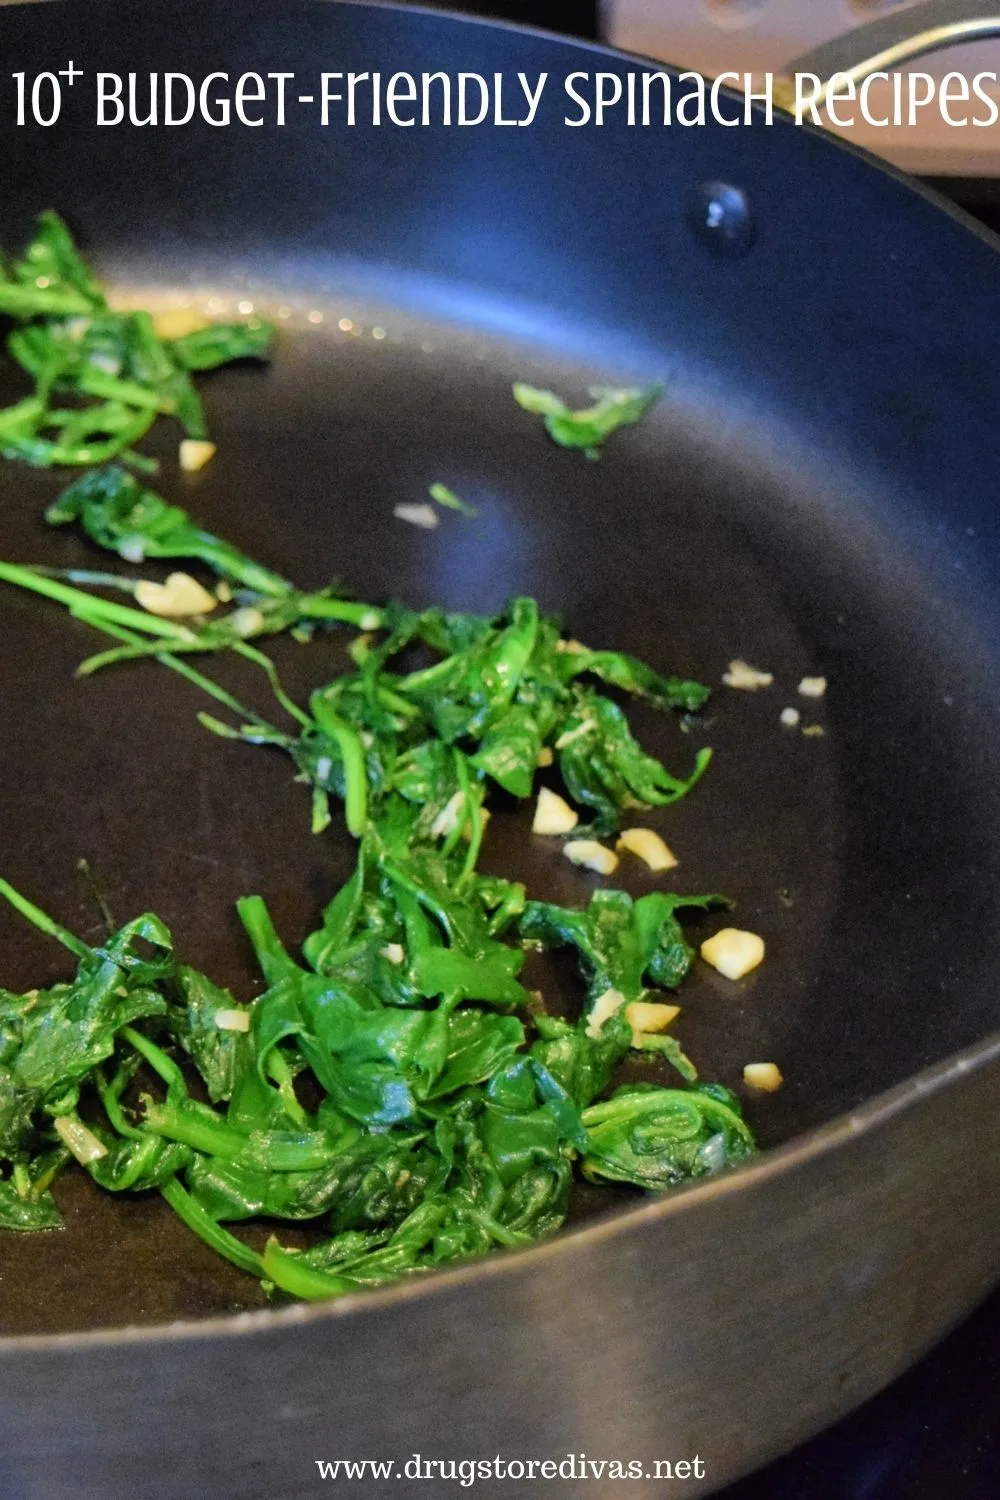 Add some more spinach into your meals with these 10+ Super Spinach Recipes from www.drugstoredivas.net.